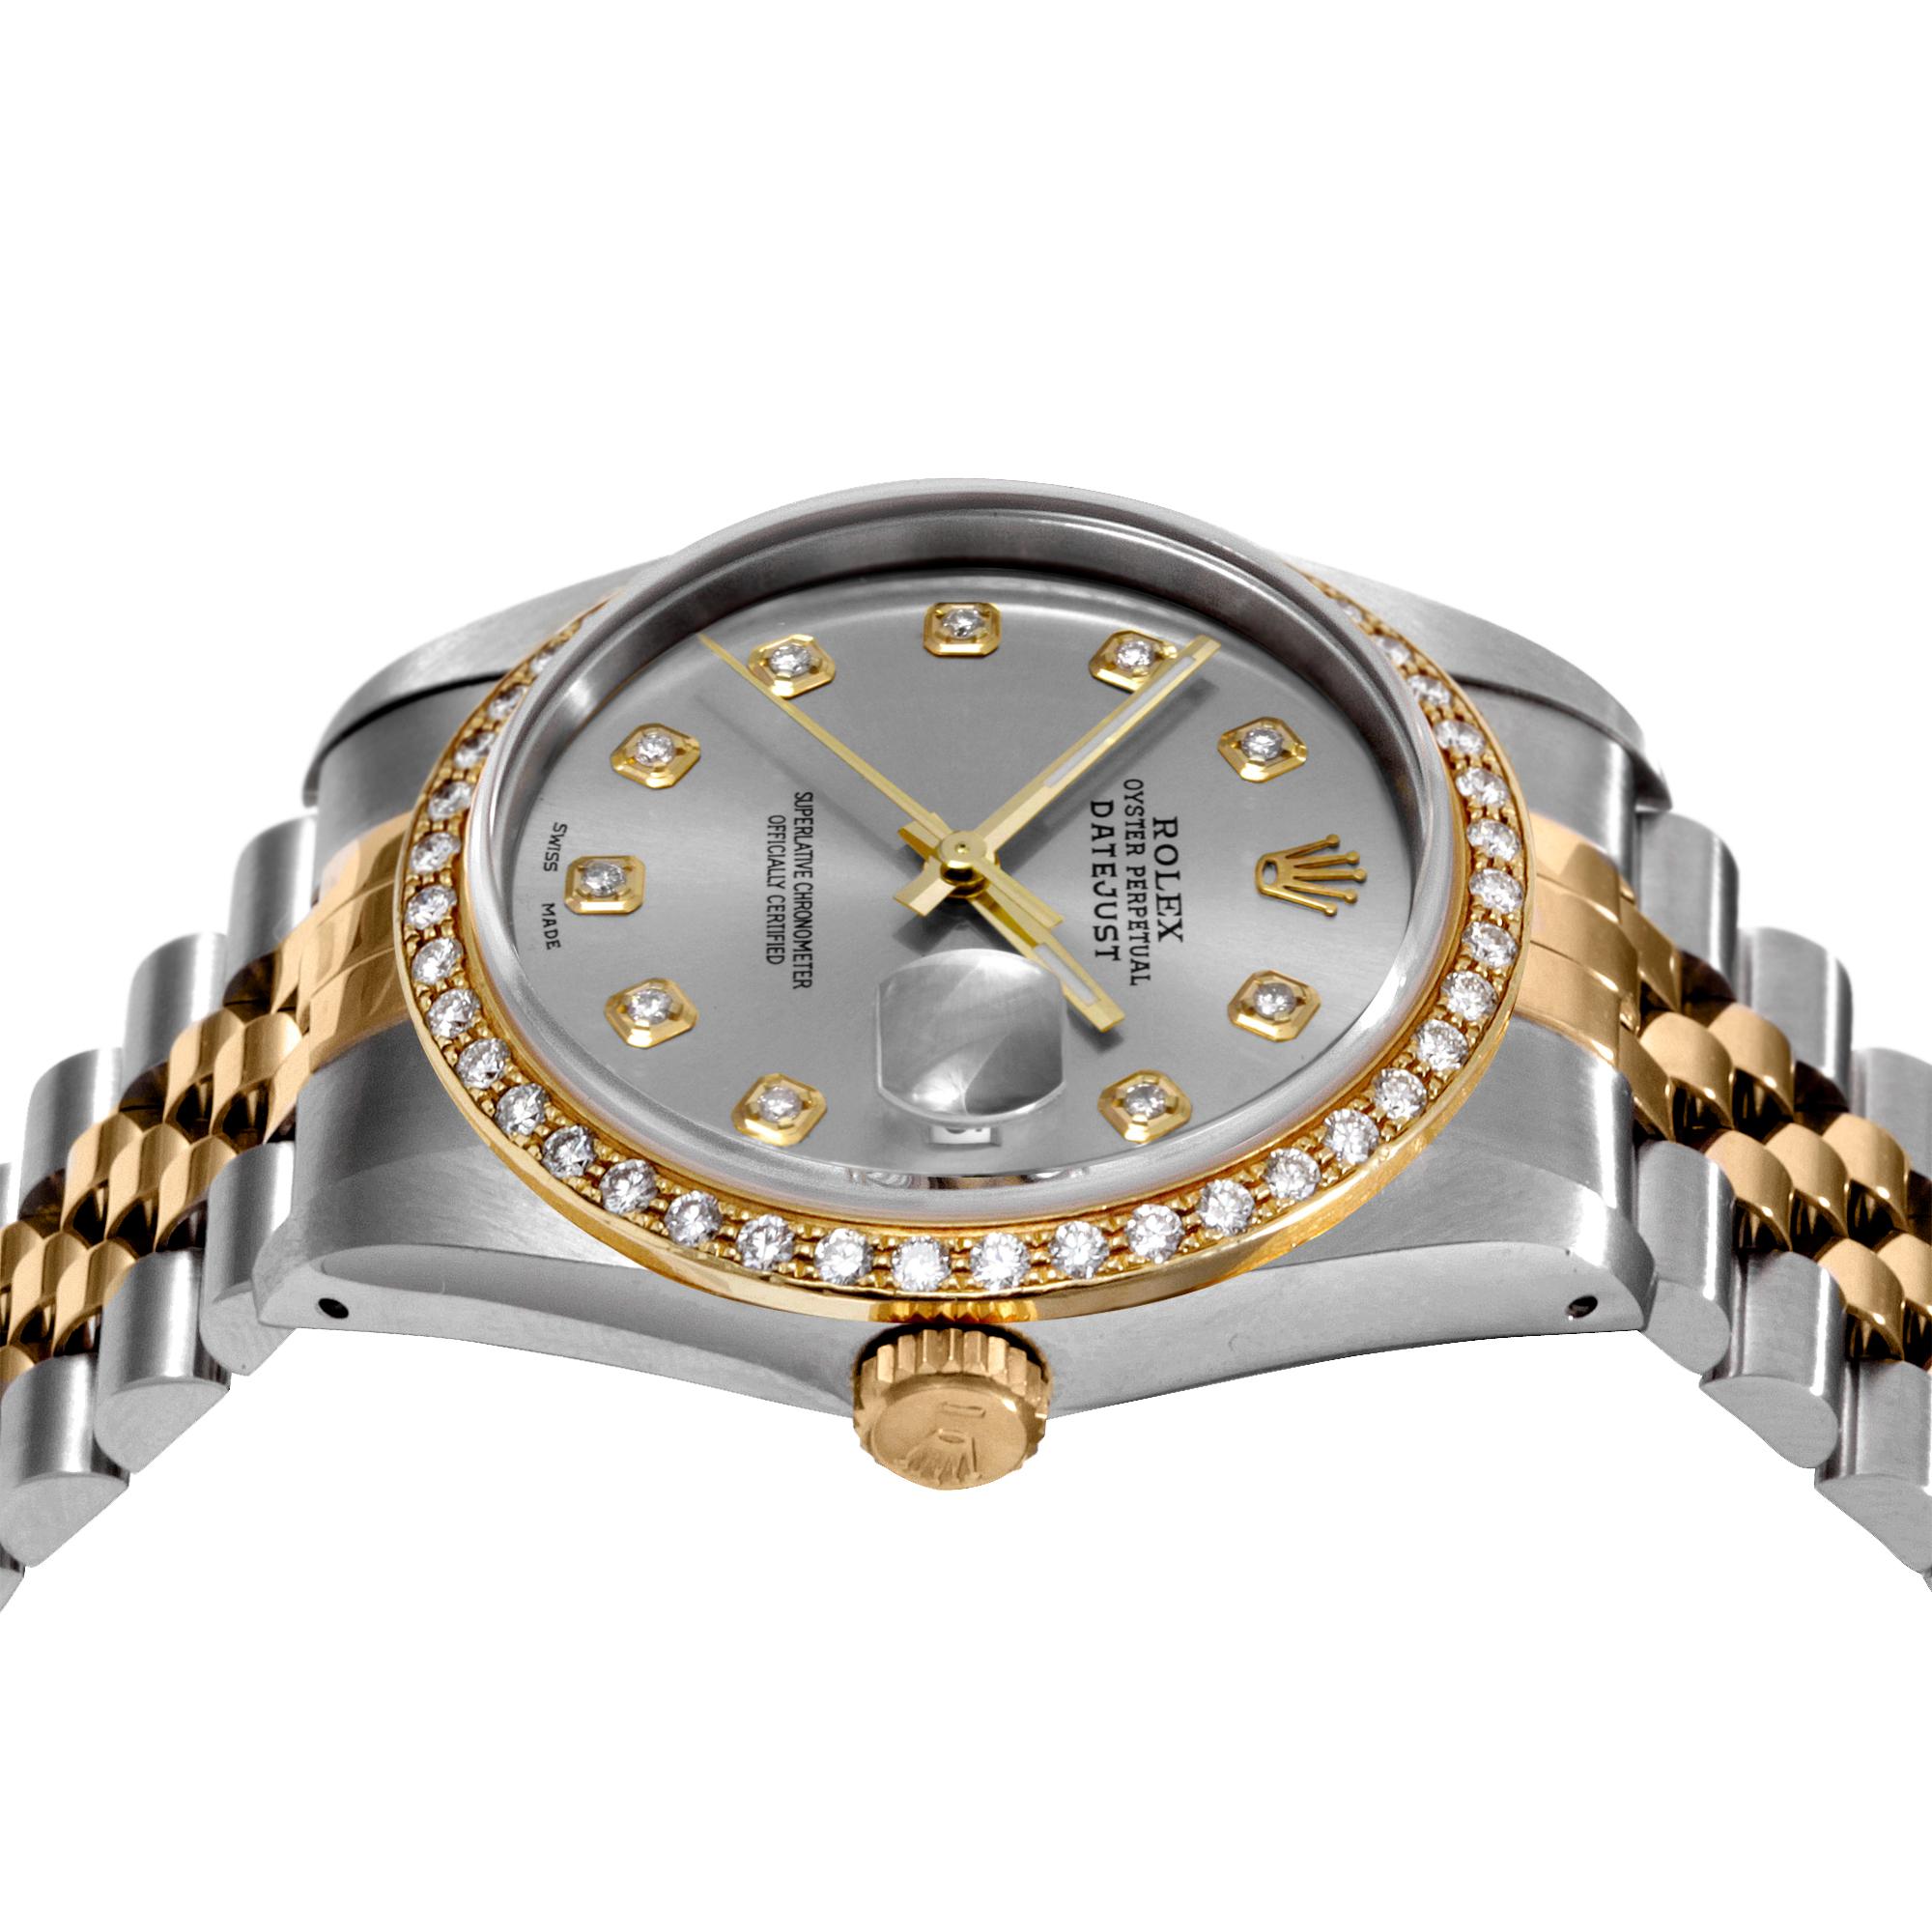 (Watch Description)
Brand - Rolex
Gender - Unisex
Model - 16013 Perpetual 
Metals - Stainless steel  / Yellow gold
Case size - 36mm
Bezel -Yellow Gold Diamond
Crystal - Sapphire
Movement - Automatic caliber 3035
Dial - Silver Diamond
Wrist band -